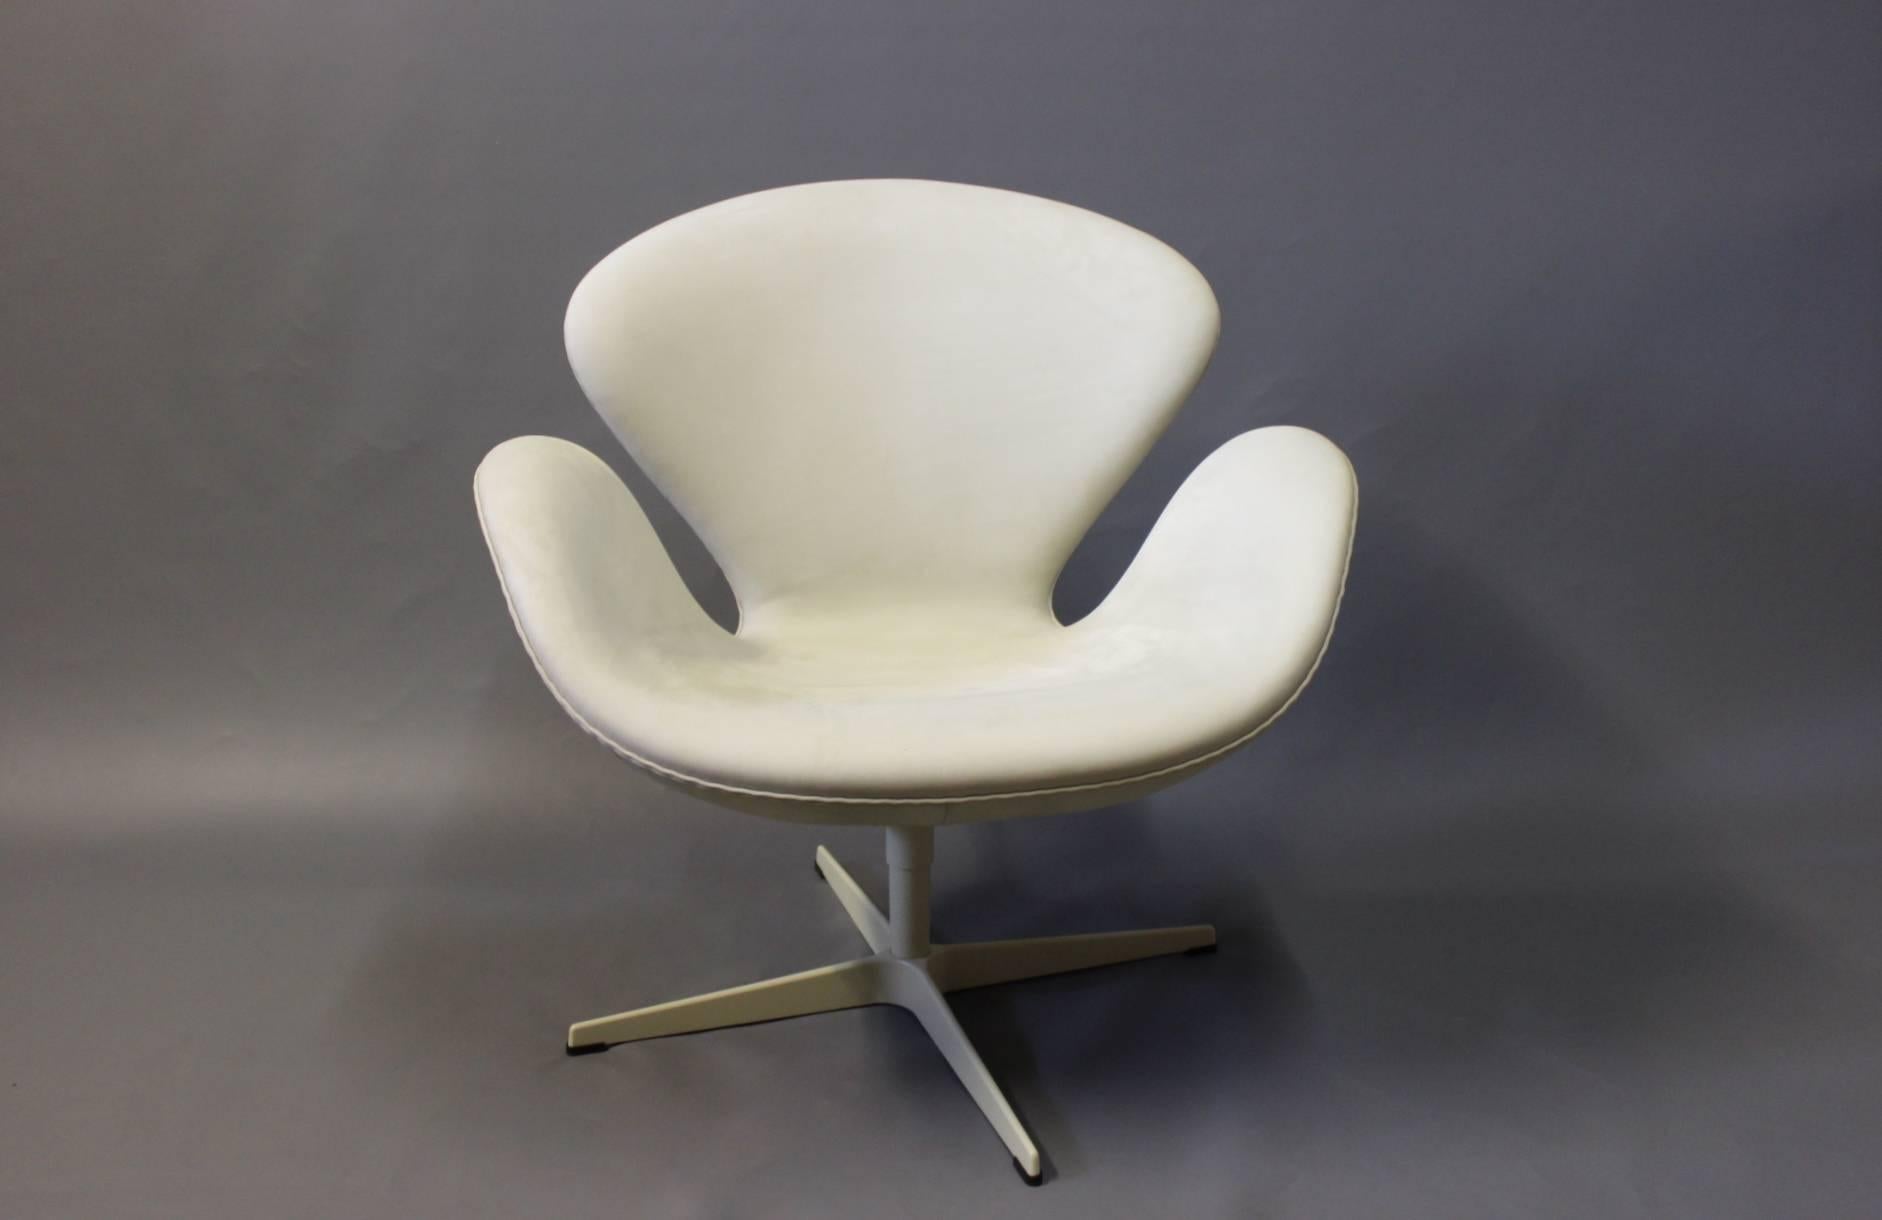 The Swan chair designed by Arne Jacobsen in 1958 and manufactured by Fritz Hansen in 2015. This chair is no. 86 out of 300 chairs made, "Fritz Hansen's choice", in the special Nubuck leather which is natural leather with a velour like